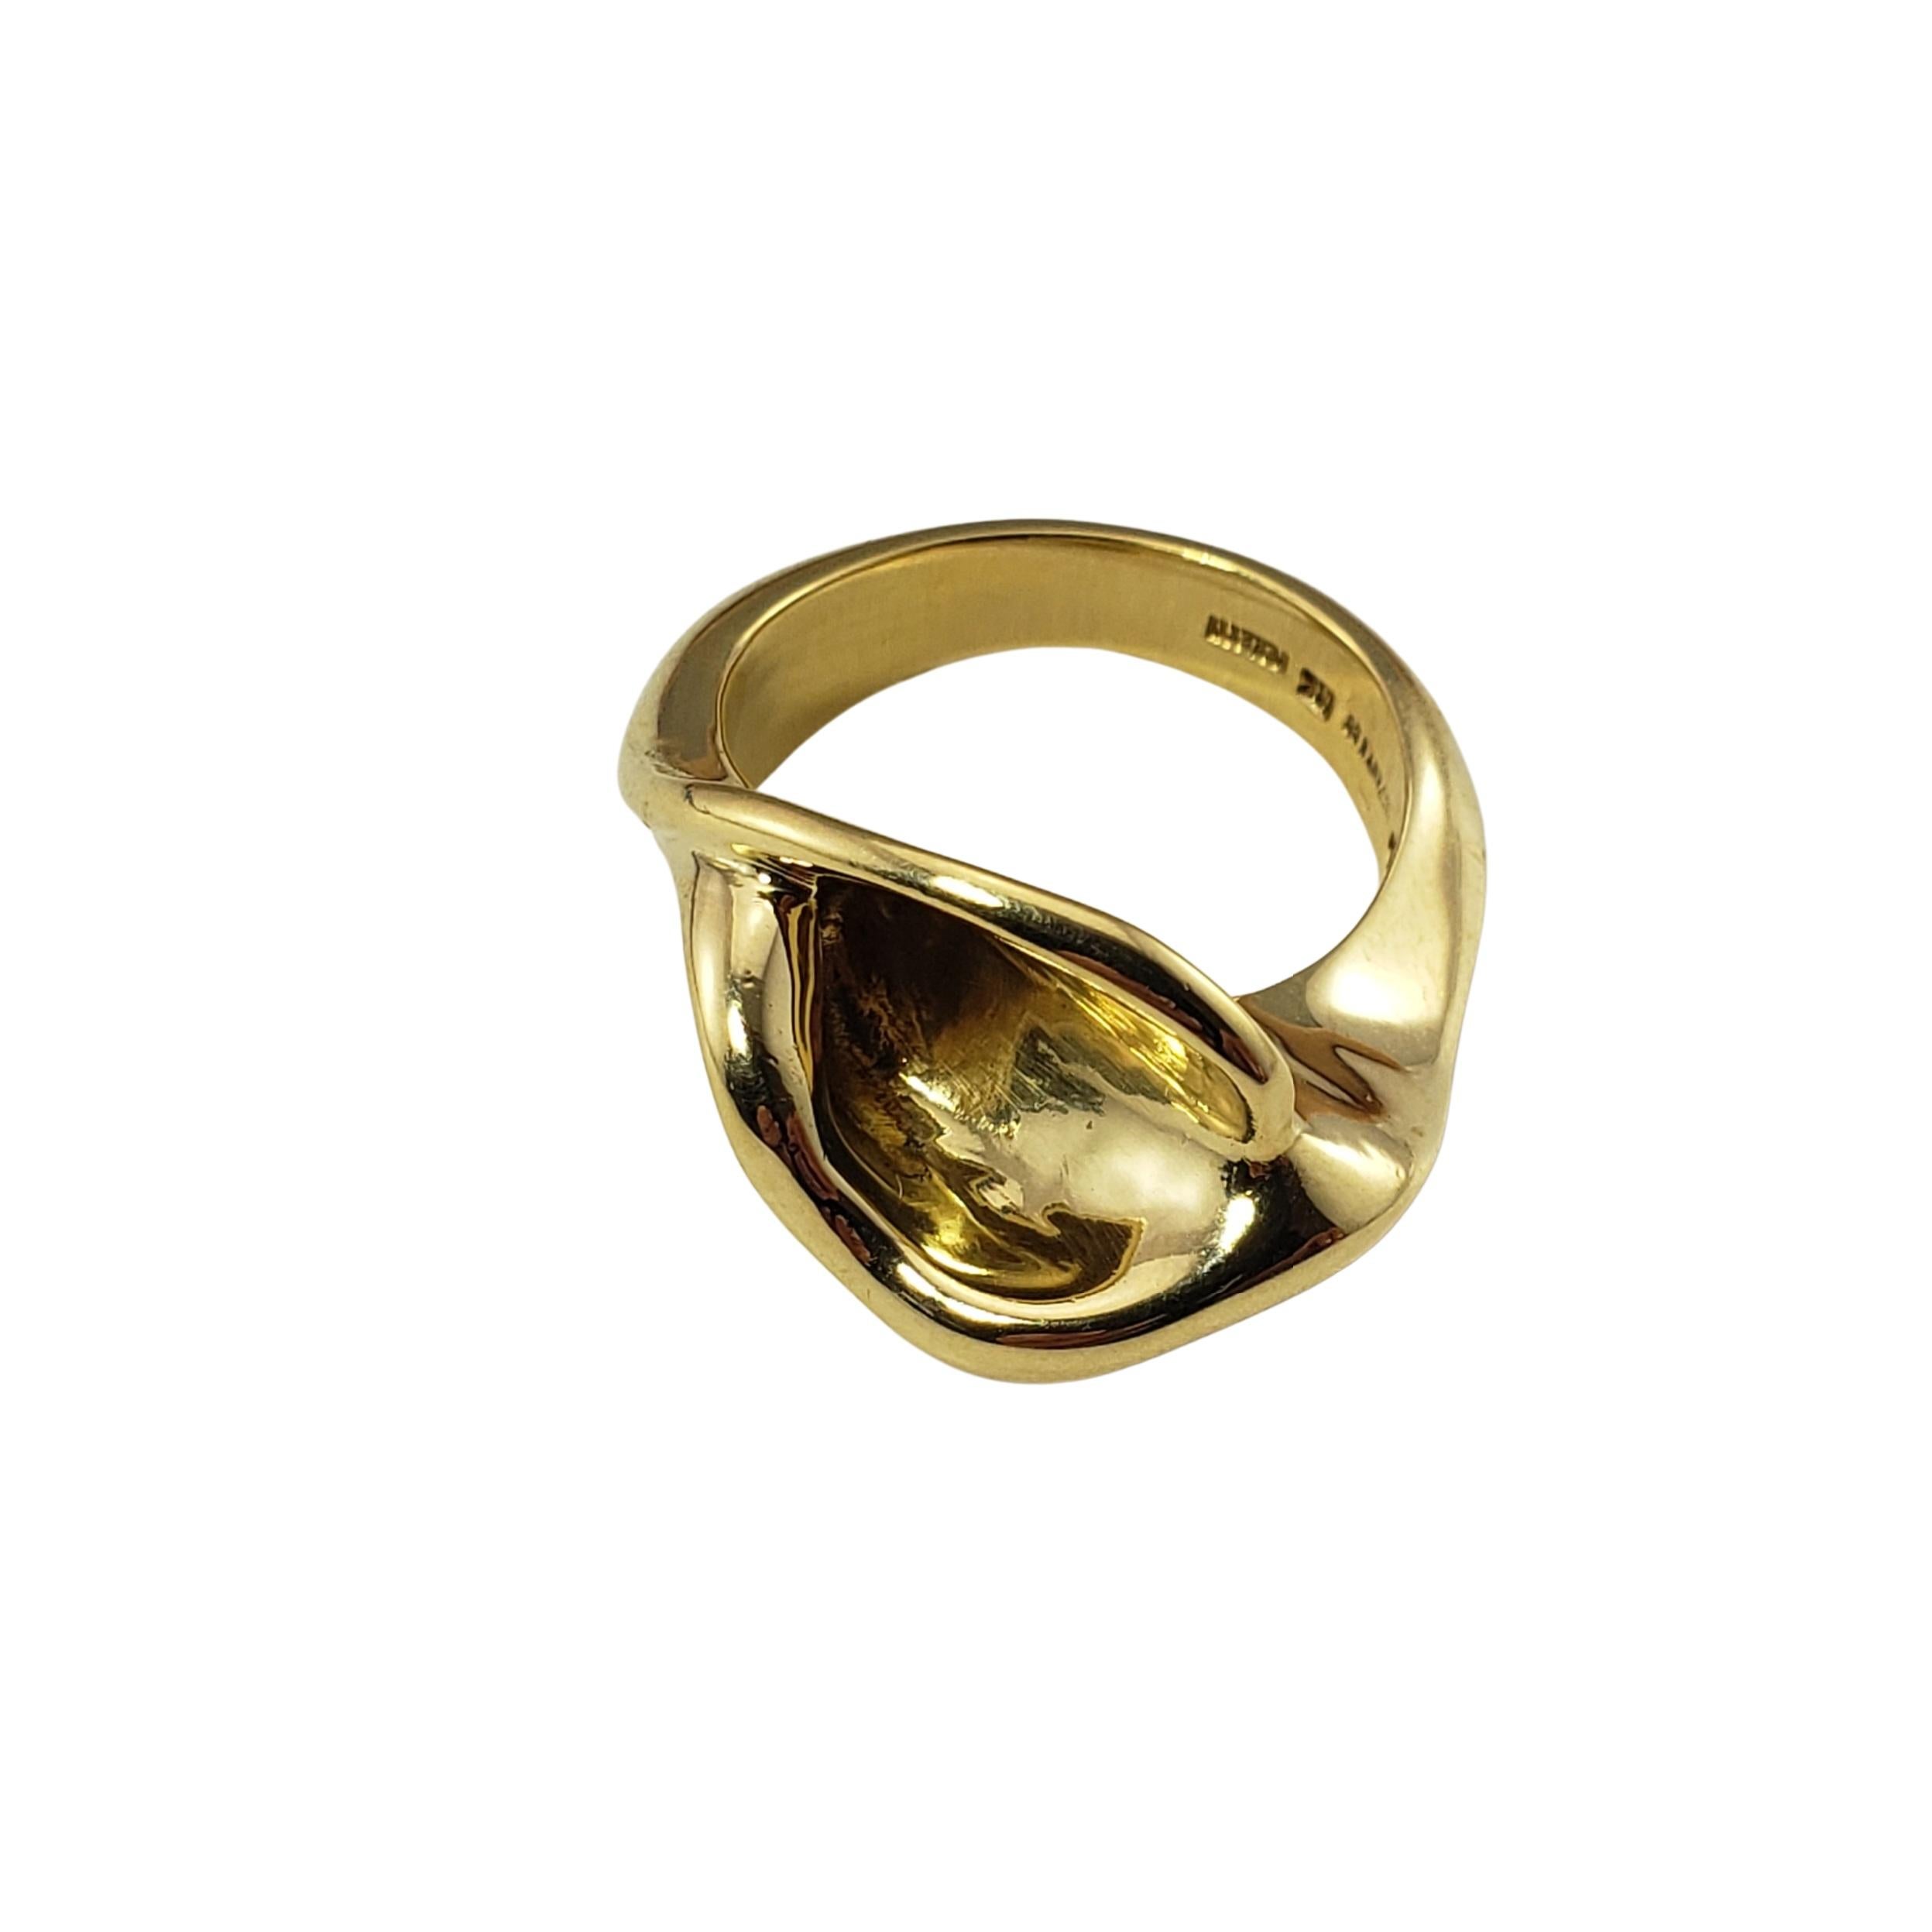 Tiffany & Co Elsa Peretti 18 Karat Yellow Gold Calla Lily Ring Size 5.75-

This graceful calla lily ring by Elsa Peretti for Tiffany is crafted in meticulously detailed 18K yellow gold.  Width:  12 mm.  Shank:  4 mm.

Ring Size:  5.75

Weight:  5.7